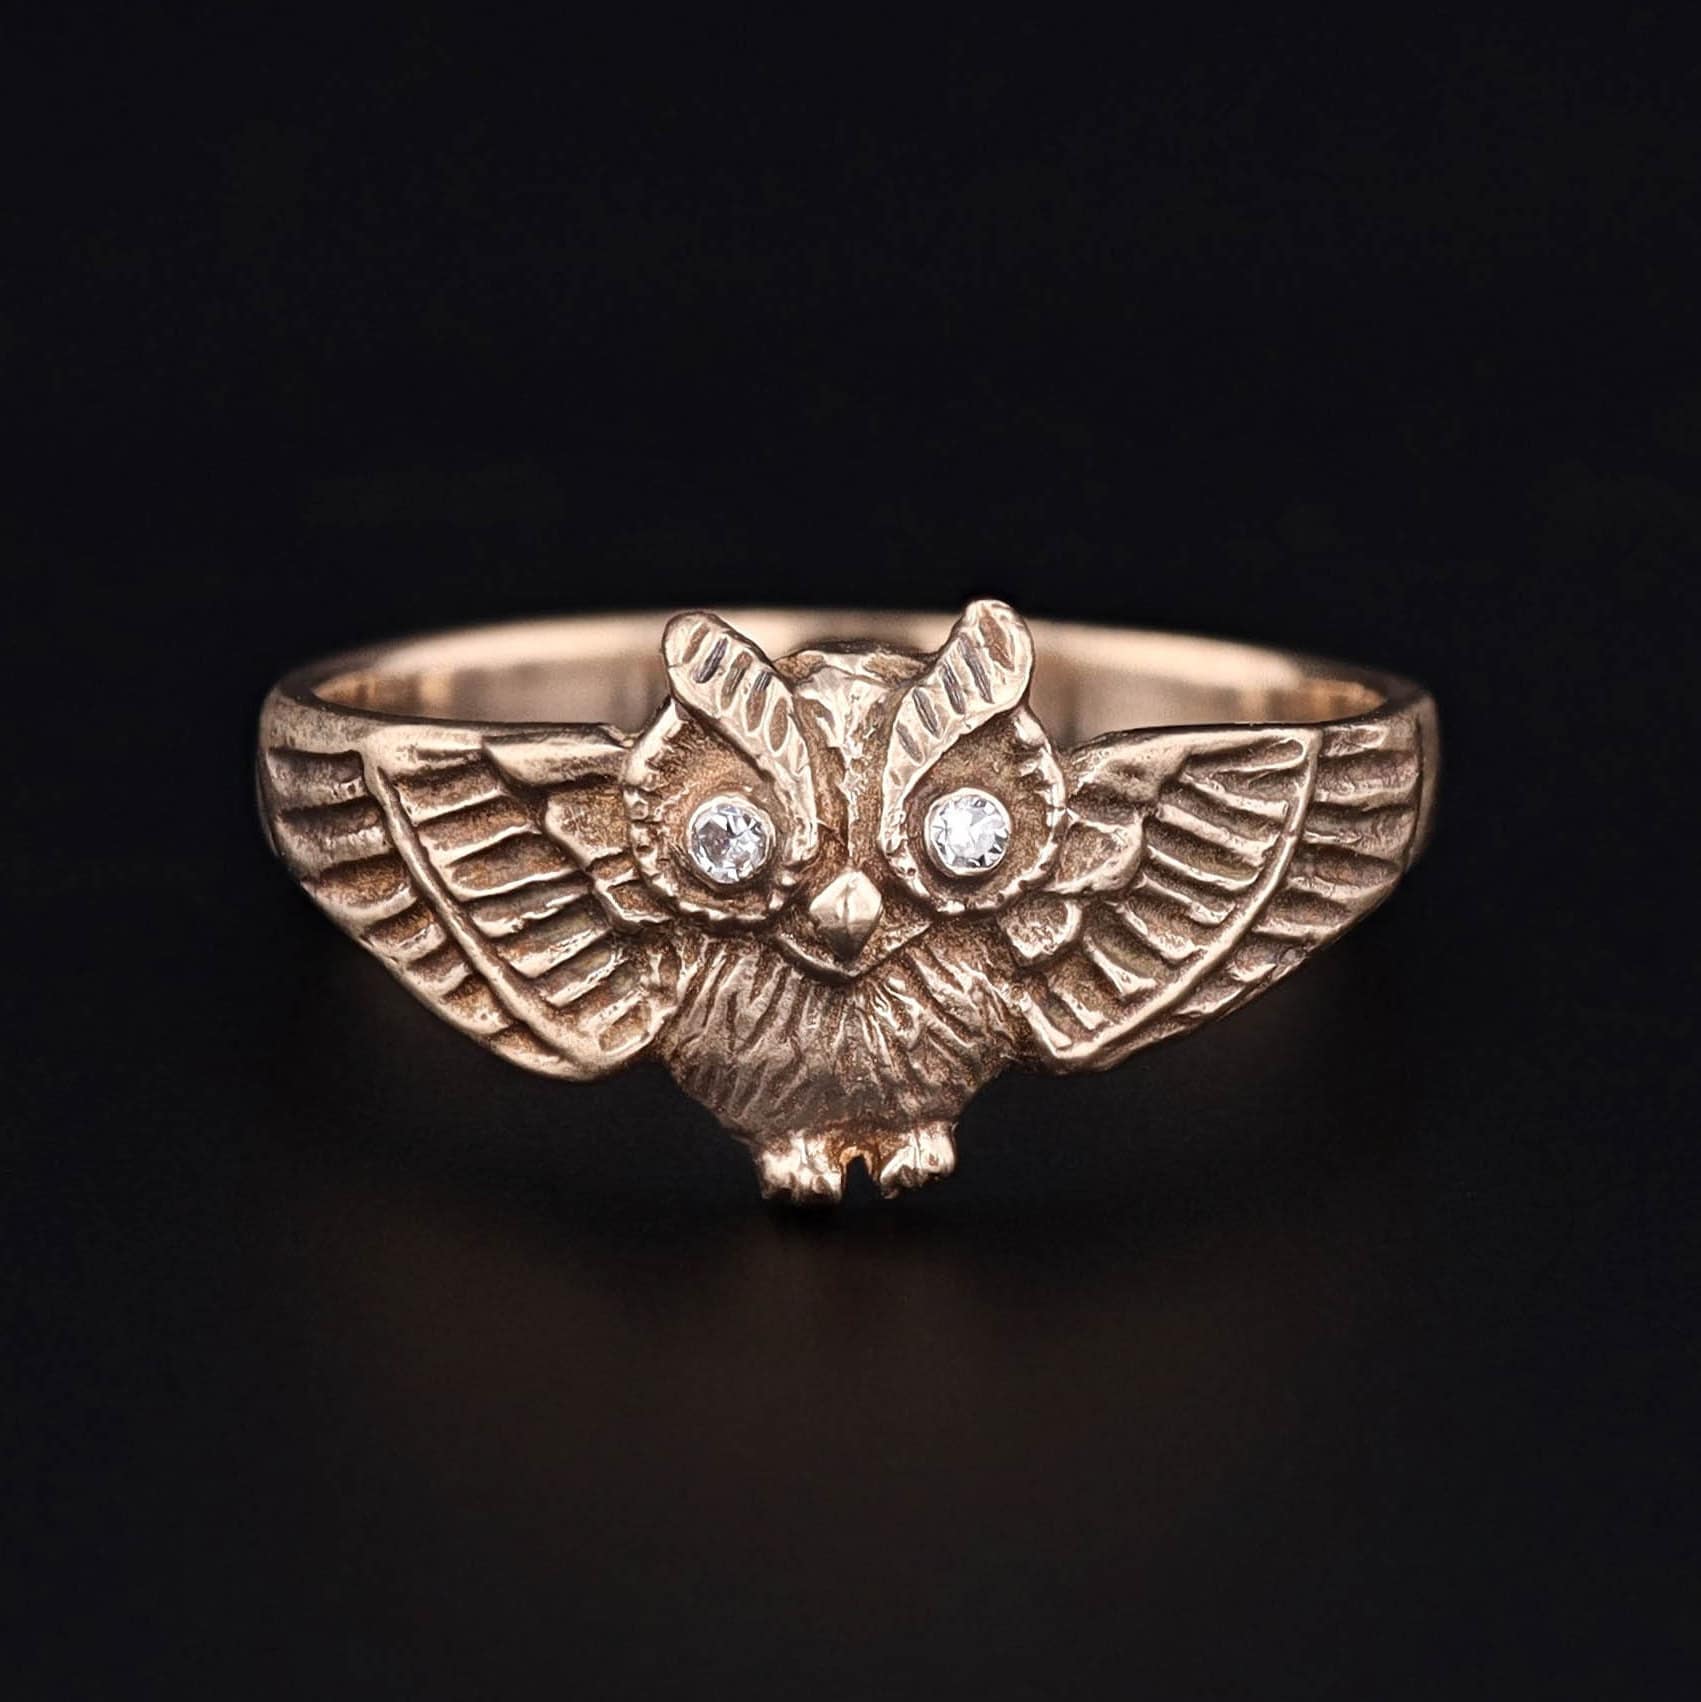 Owl with Diamond Eyes Ring of 14k Gold Antique Reproduction